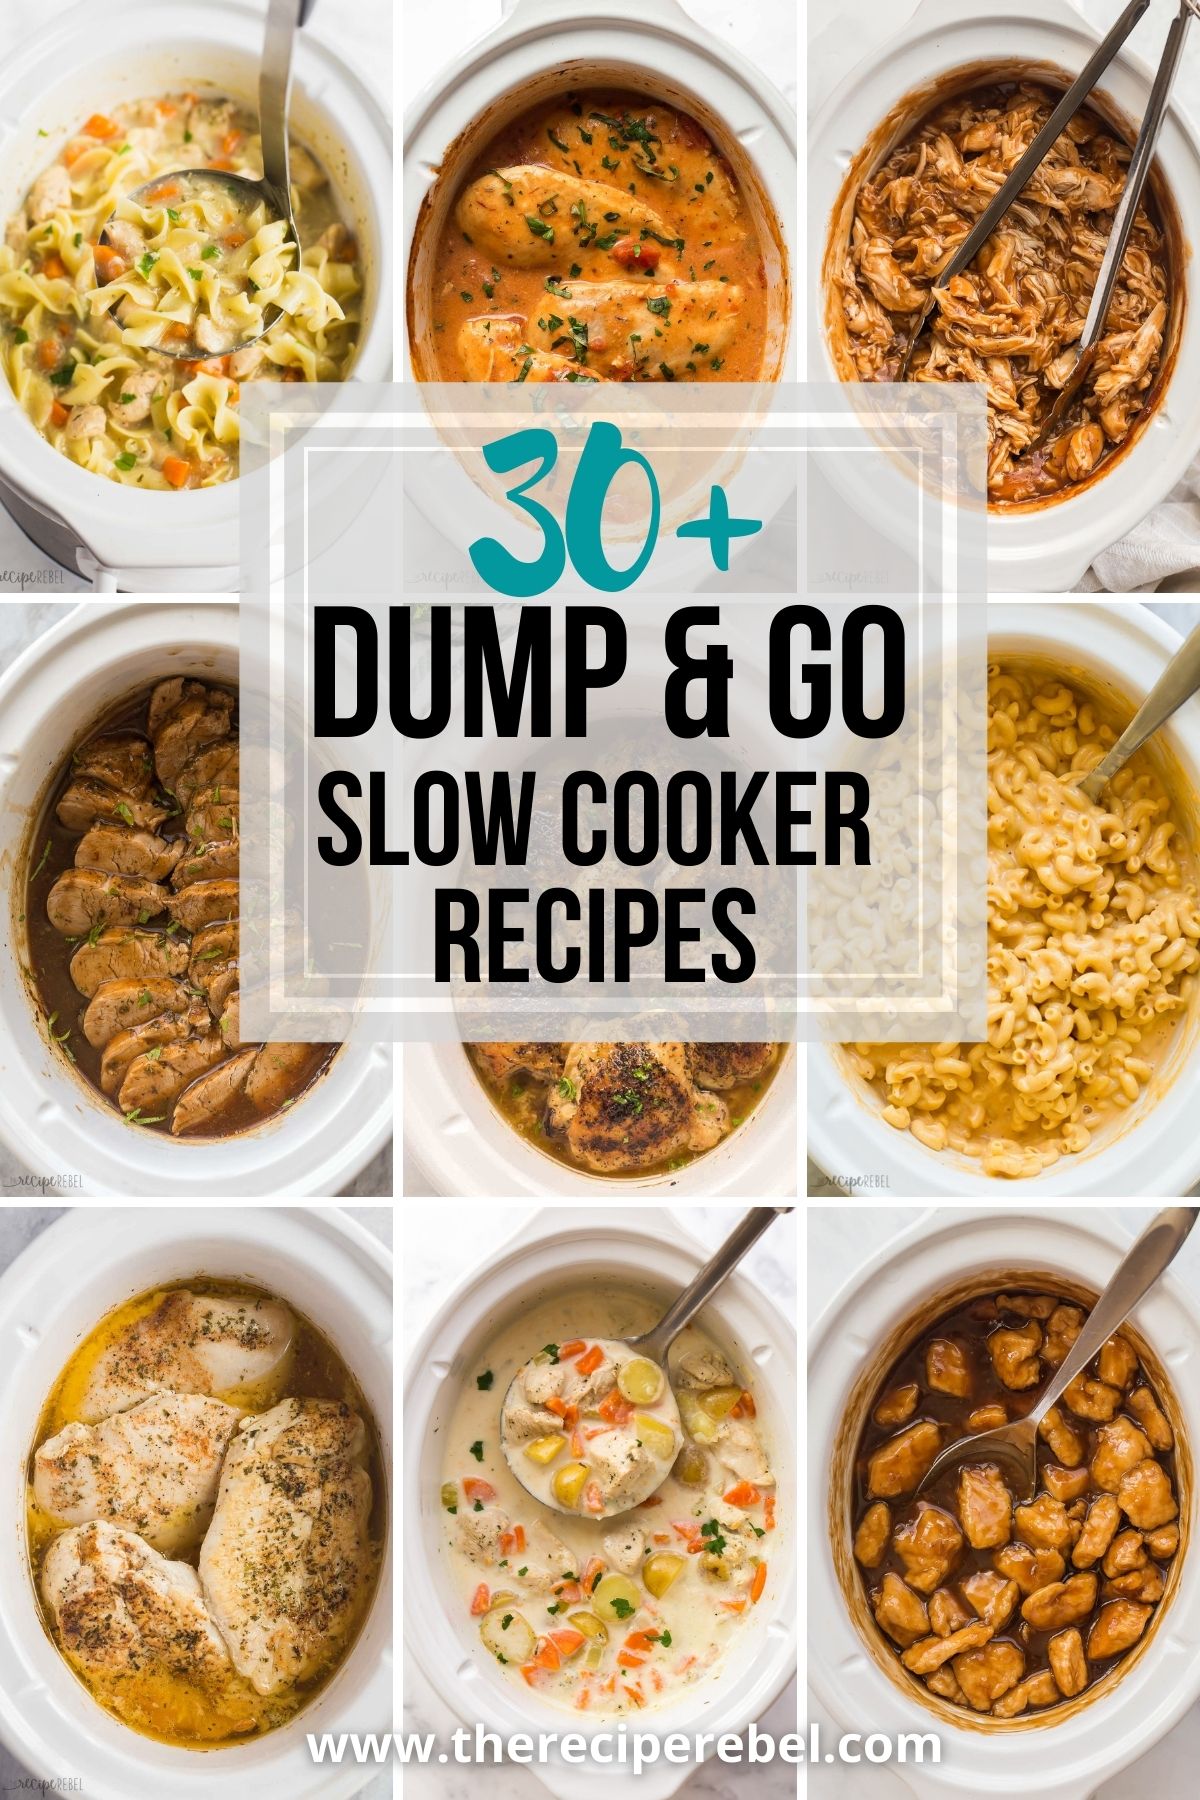 dump and go slow cooker recipes